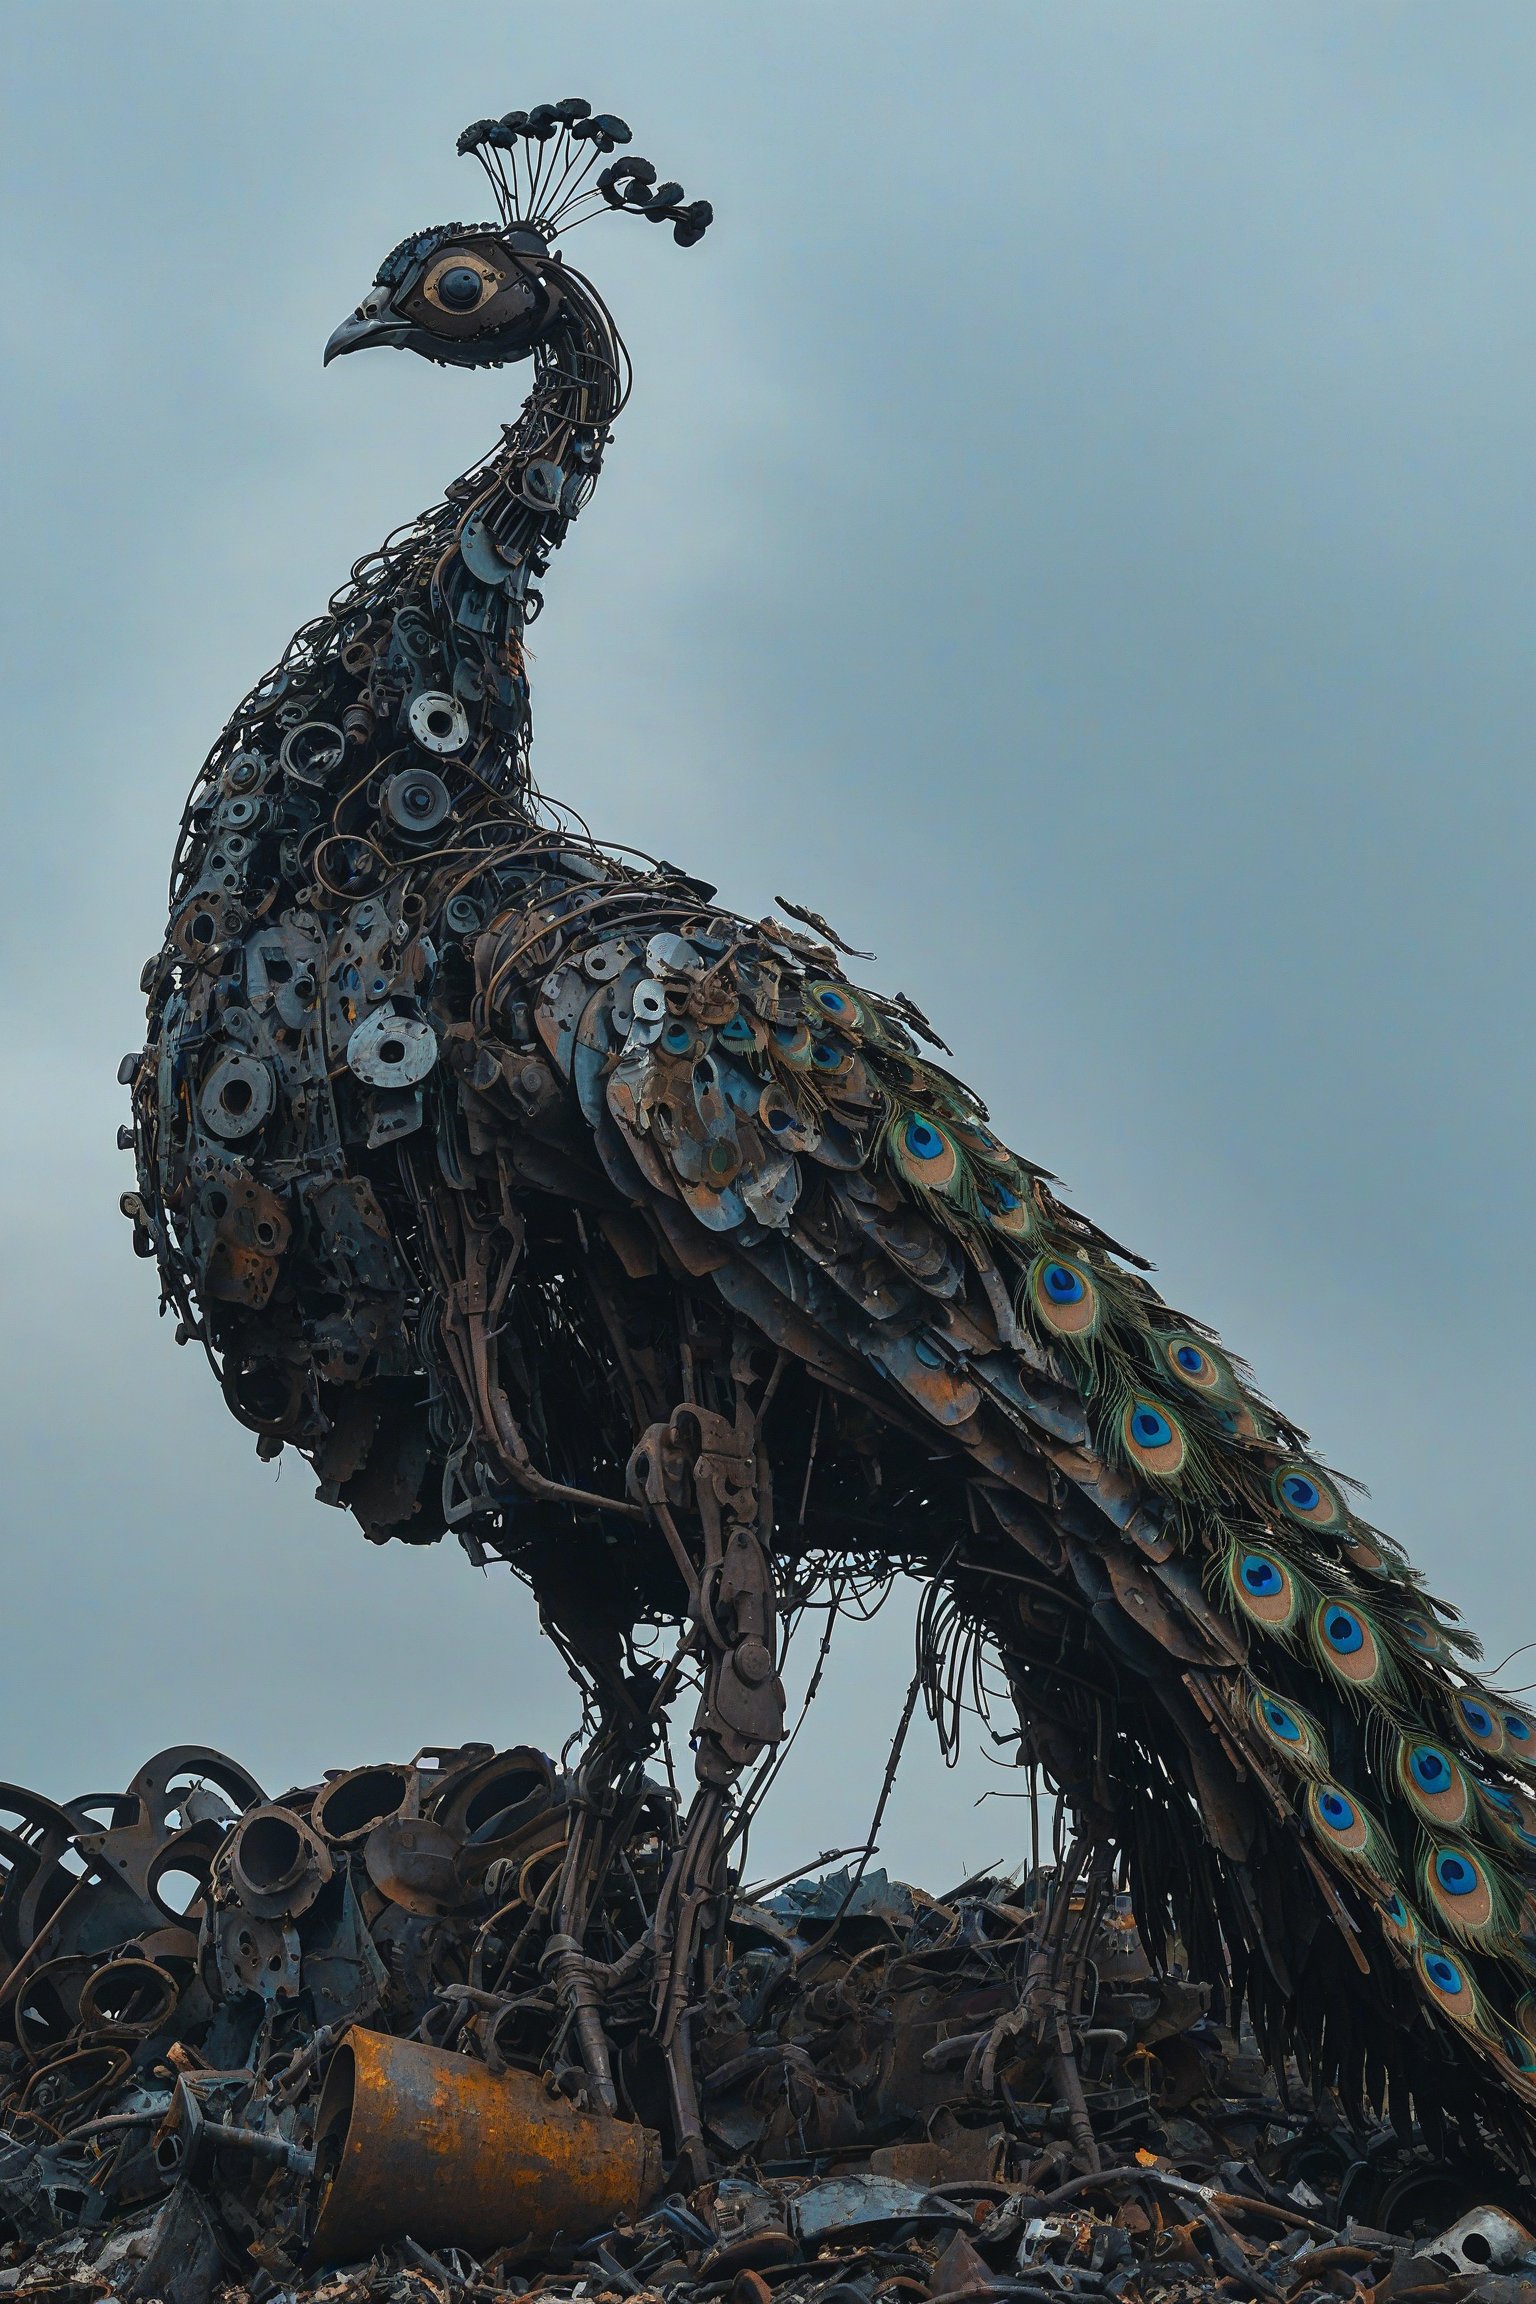 A towering, intricately constructed mechanical peacock standing atop a mound of discarded metal and debris. The peacock appears to be made of various metal parts, wires, and tools, giving it a skeletal and mechanical appearance. The background is overcast, adding a somber and post-apocalyptic feel to the scene.